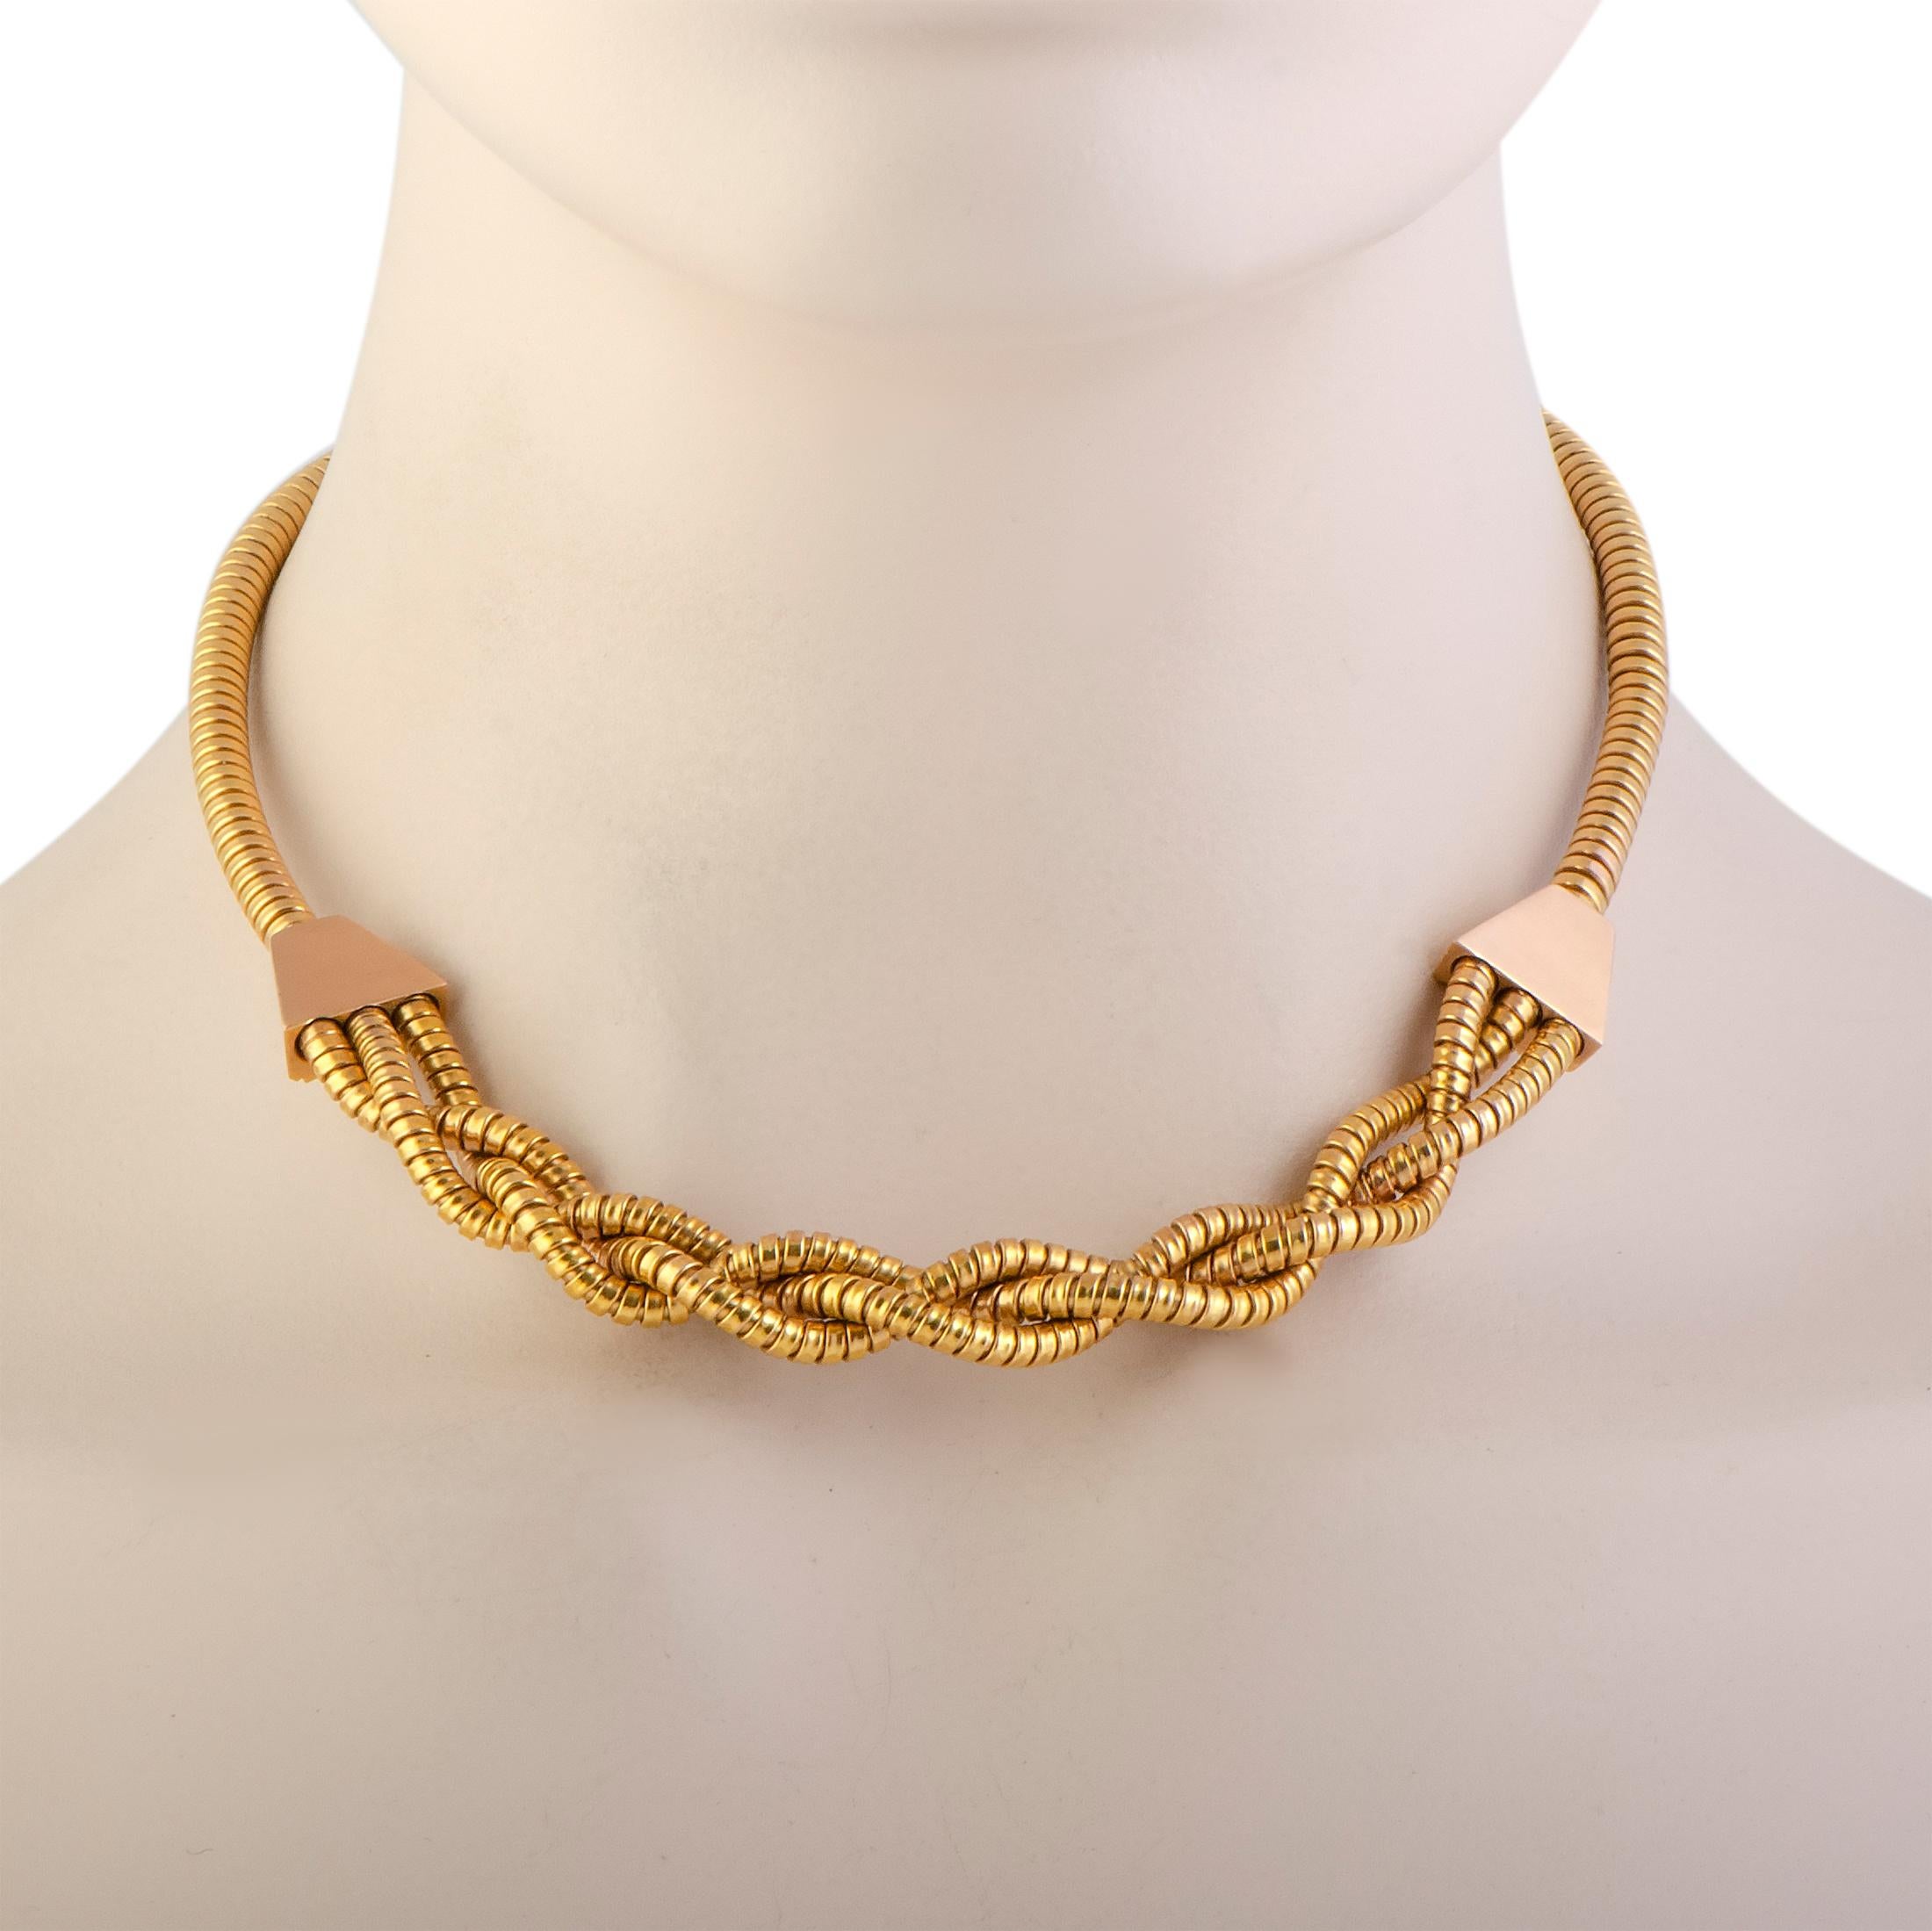 A compellingly intricate design is beautifully presented in ever-alluring gold in this stunning necklace that boasts an incredibly fashionable appeal. The necklace is masterfully crafted from 18K rose gold and it weighs 53.6 grams.